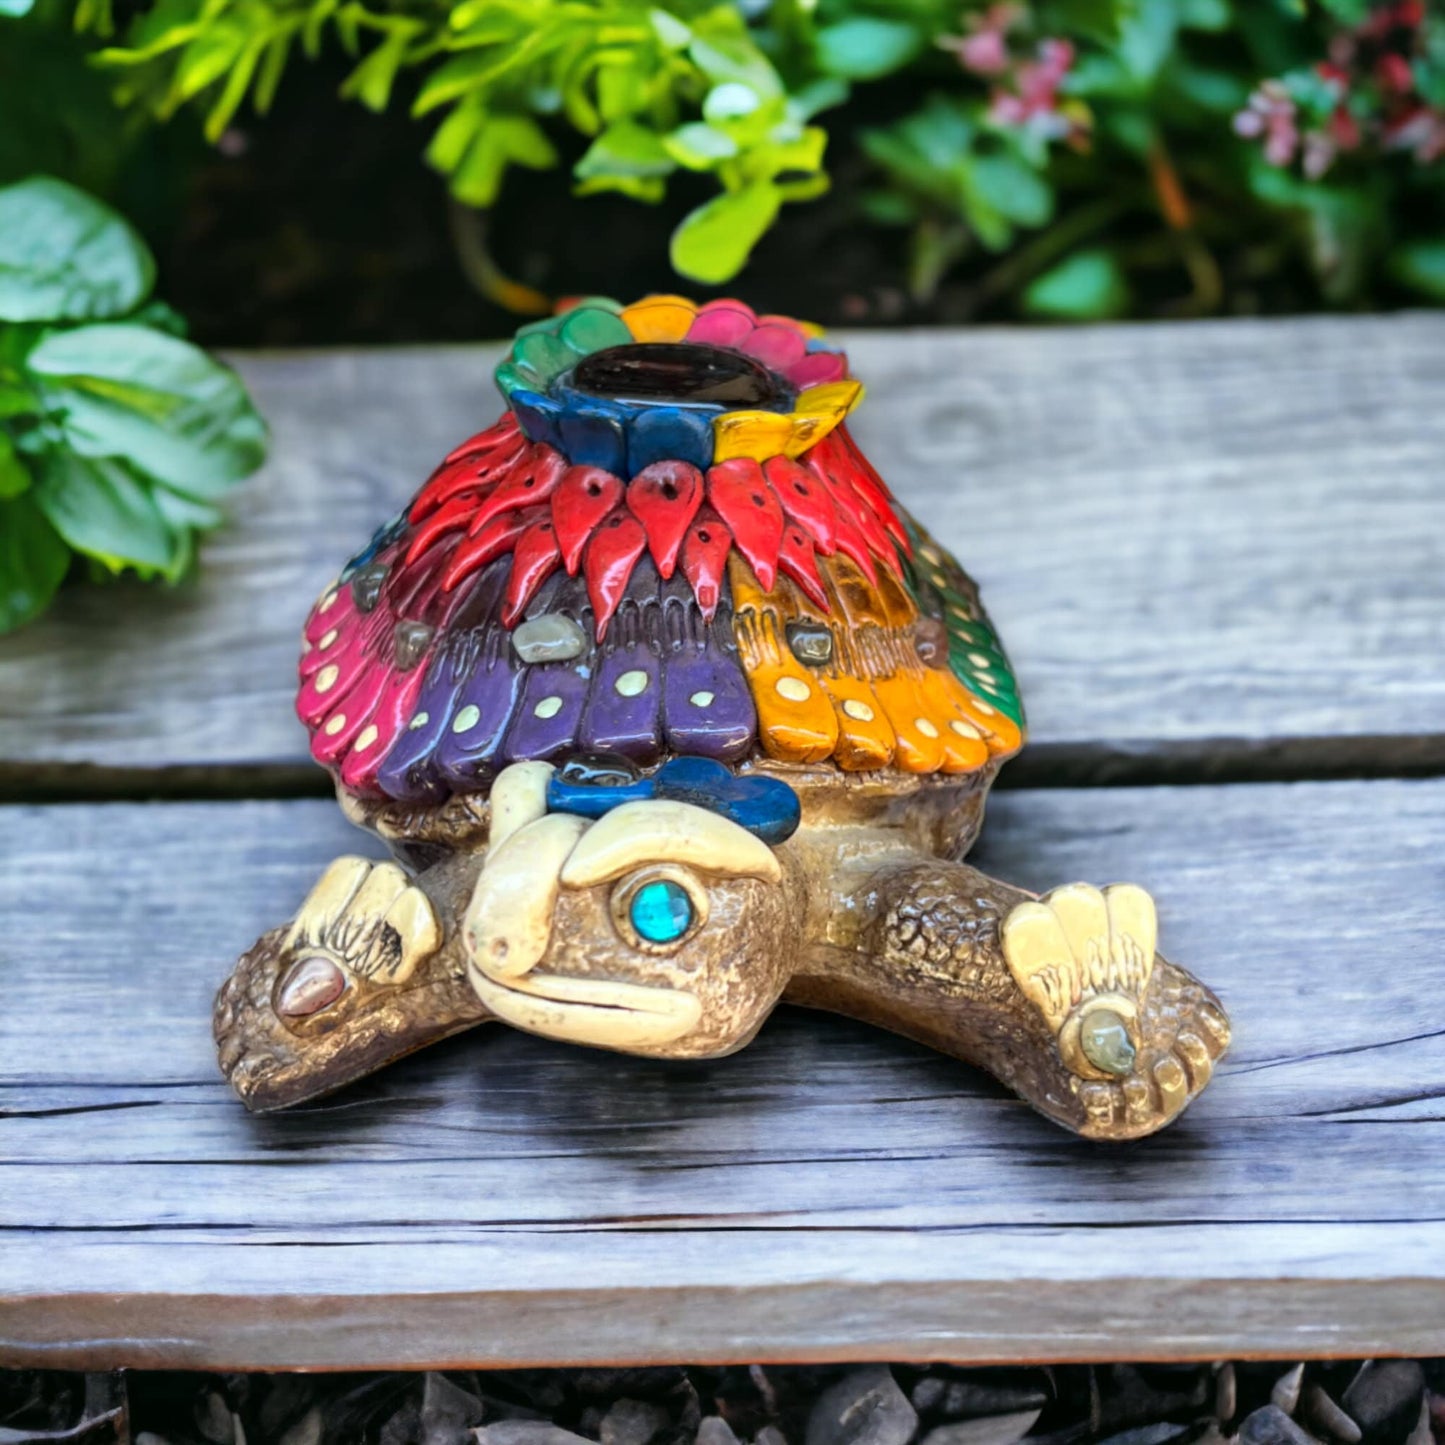 Artisan Crafted Aztec Turtle Statue | Handmade Cultural Decor Accent (Small)